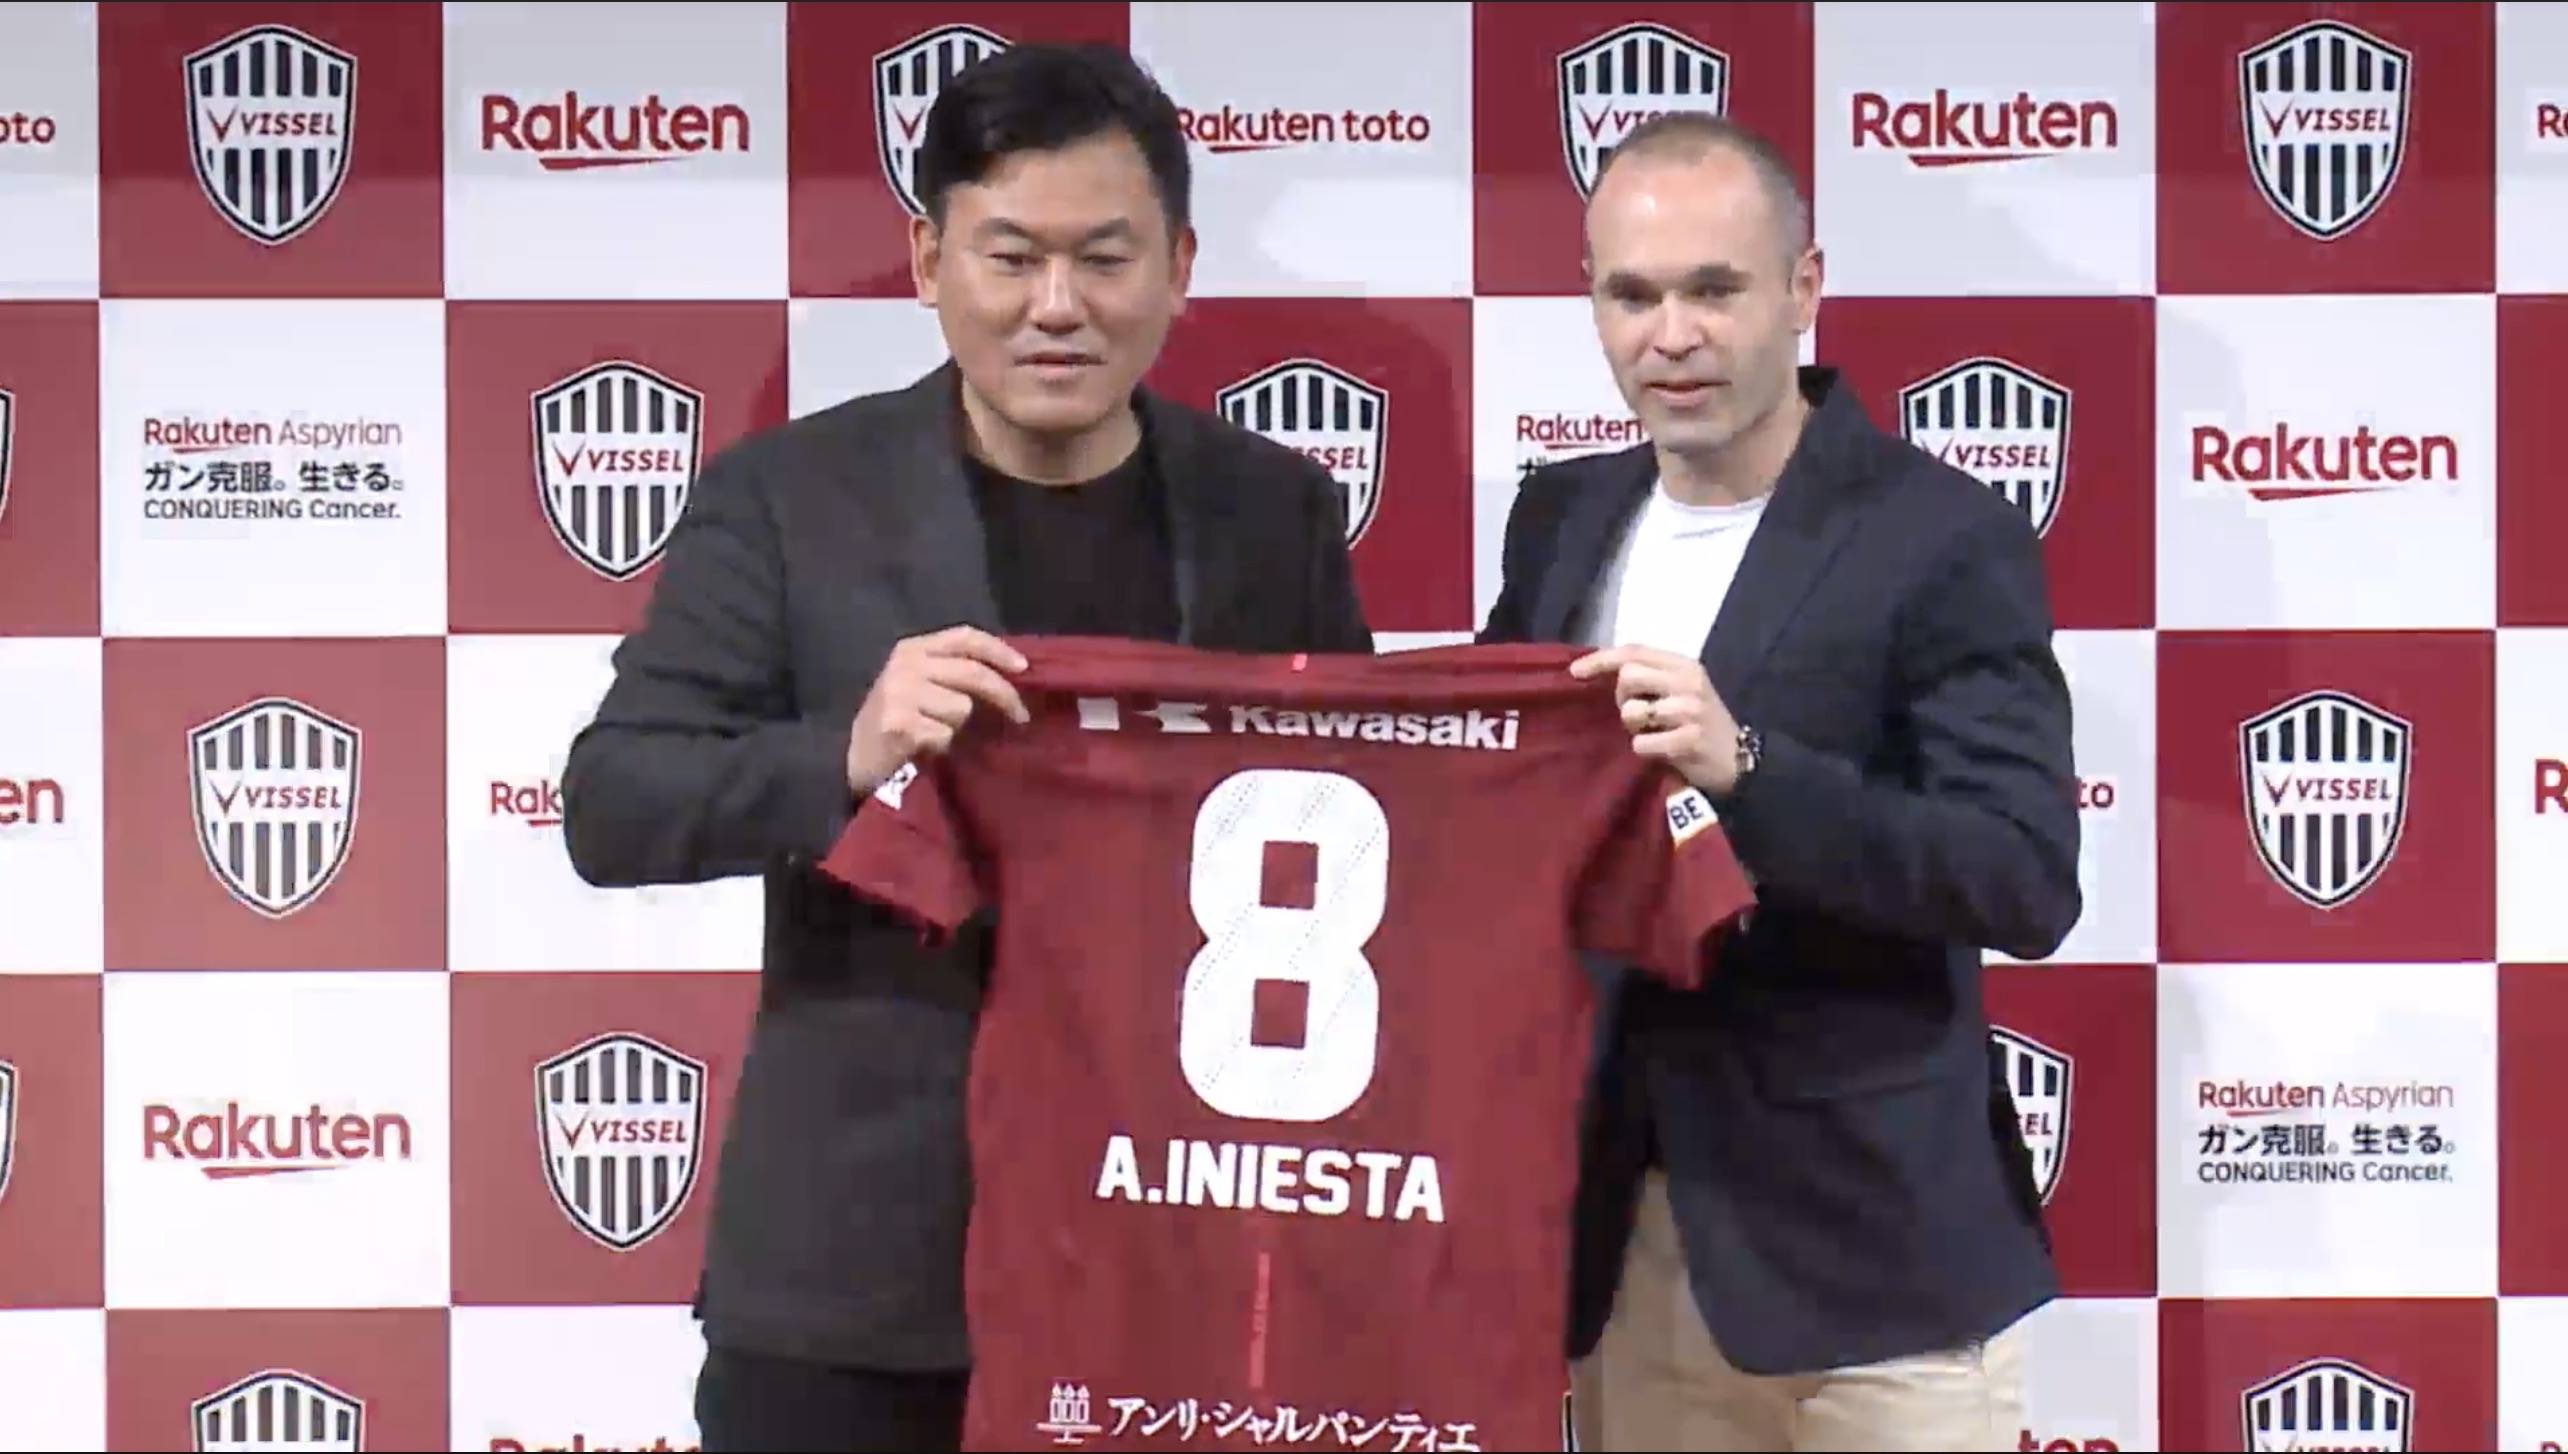 Vissel signing Iniesta: “I hope to contribute to Japanese football’s development”